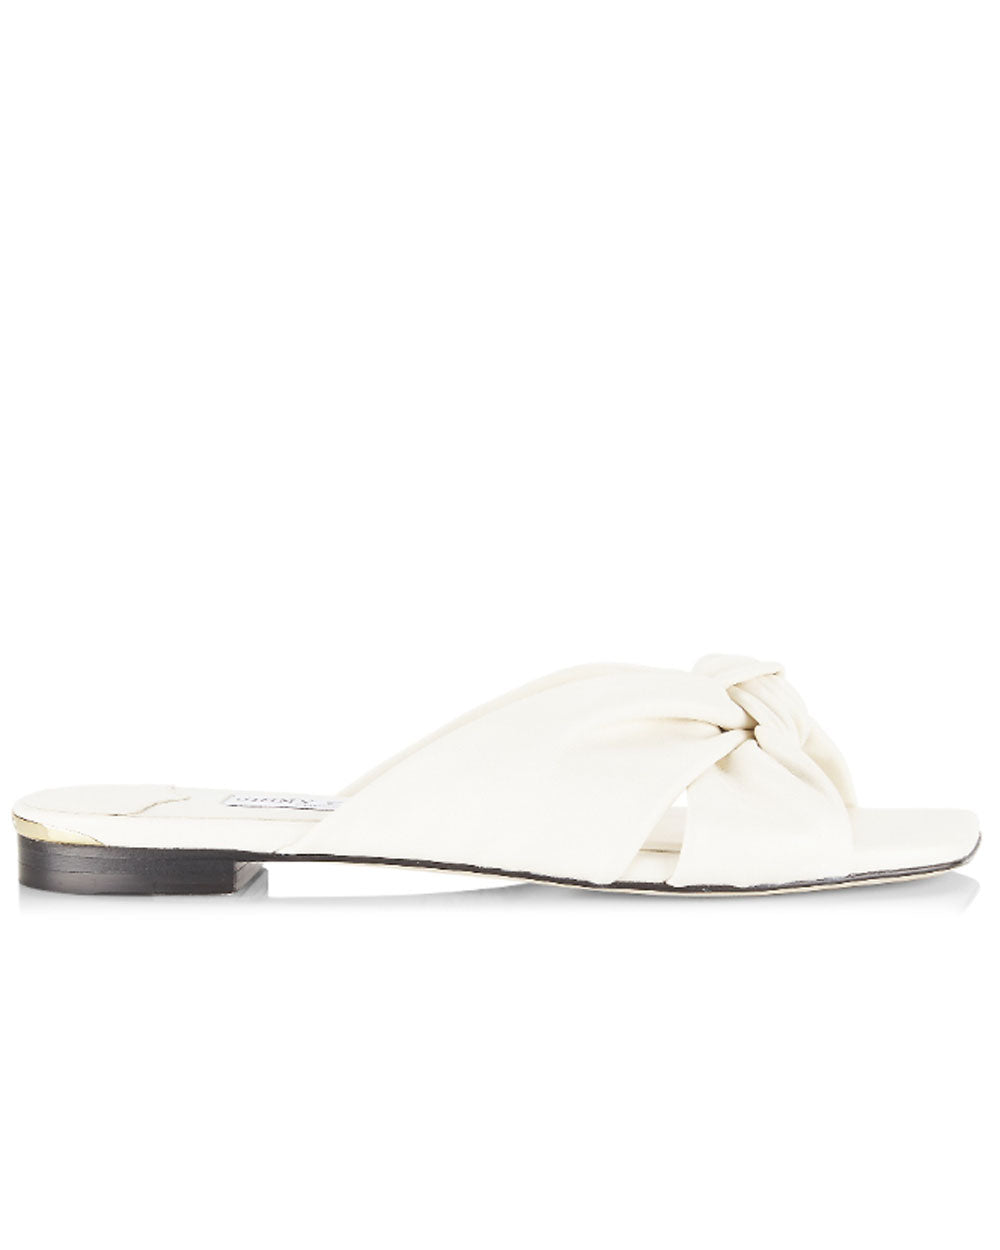 Avenue Knotted Leather Sandal in Latte